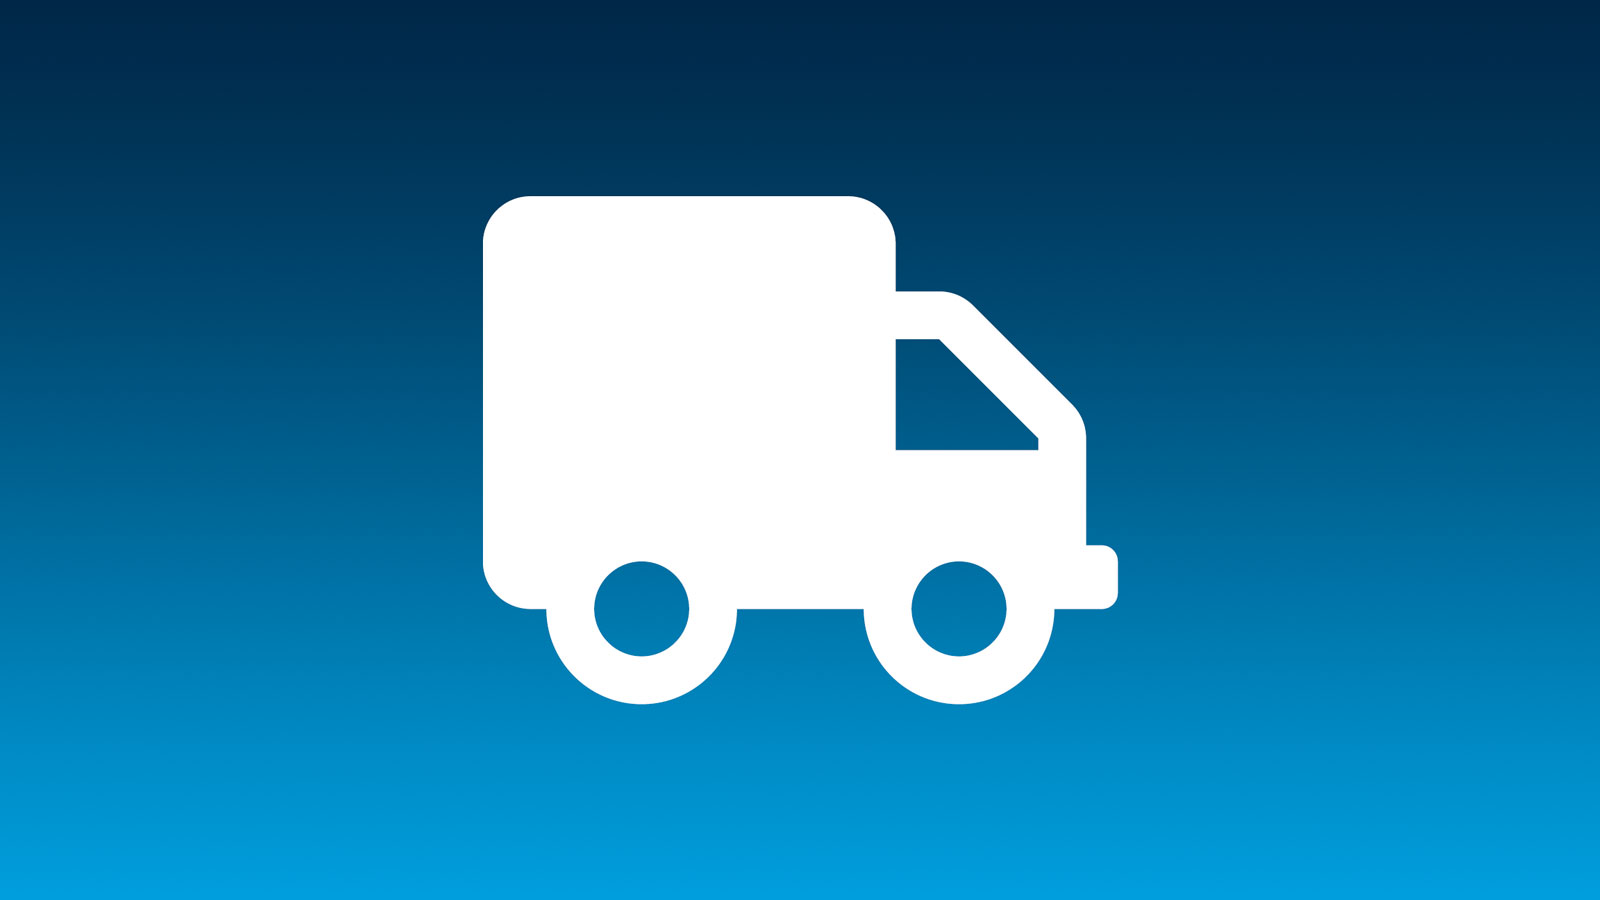 Truck Icon on Blue Gradient